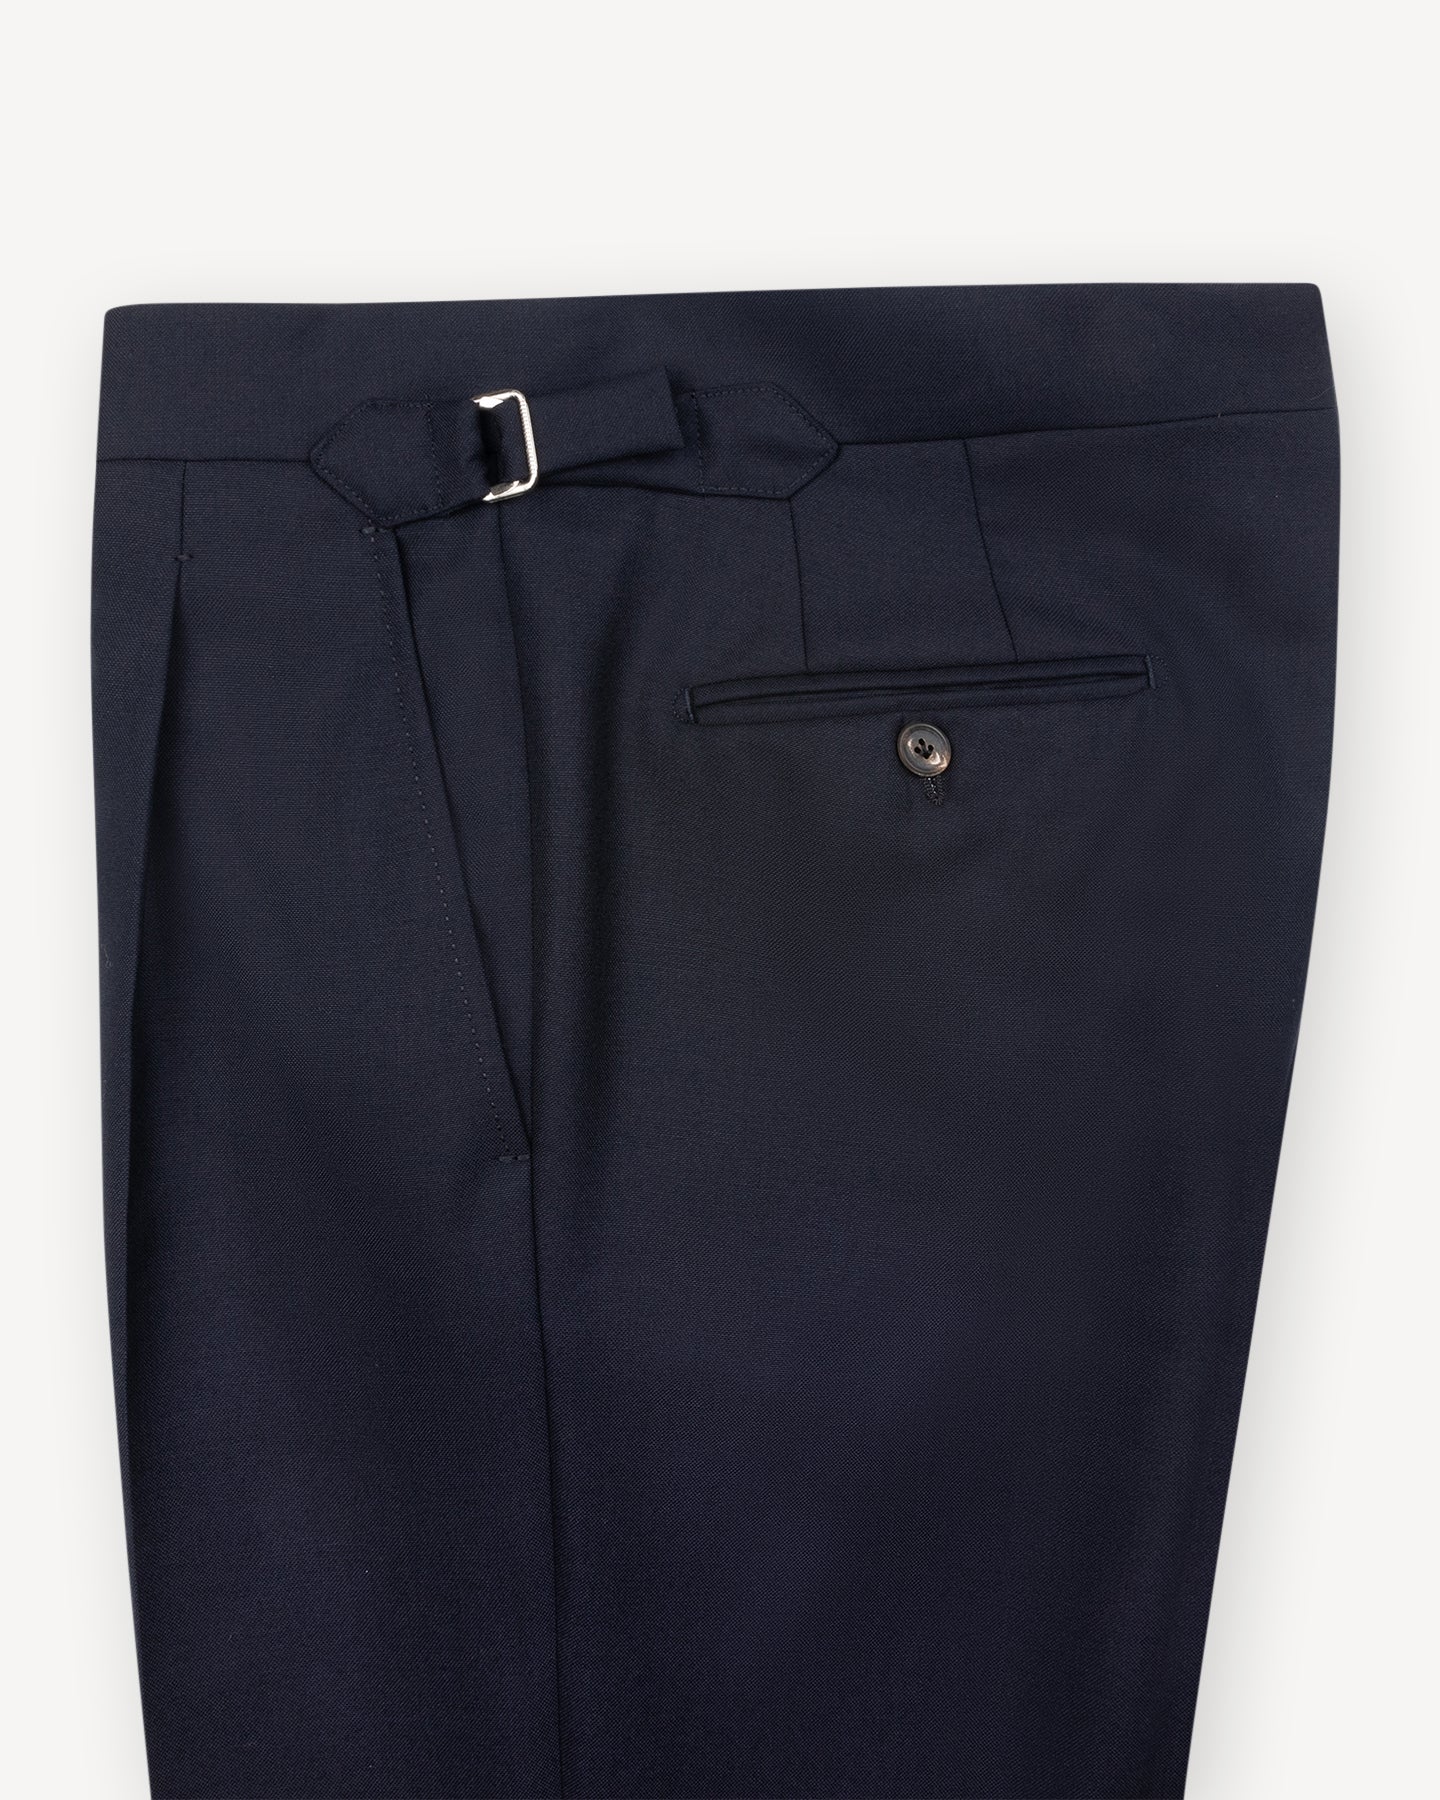 Navy Hopsack Suit Trousers with side adjusters